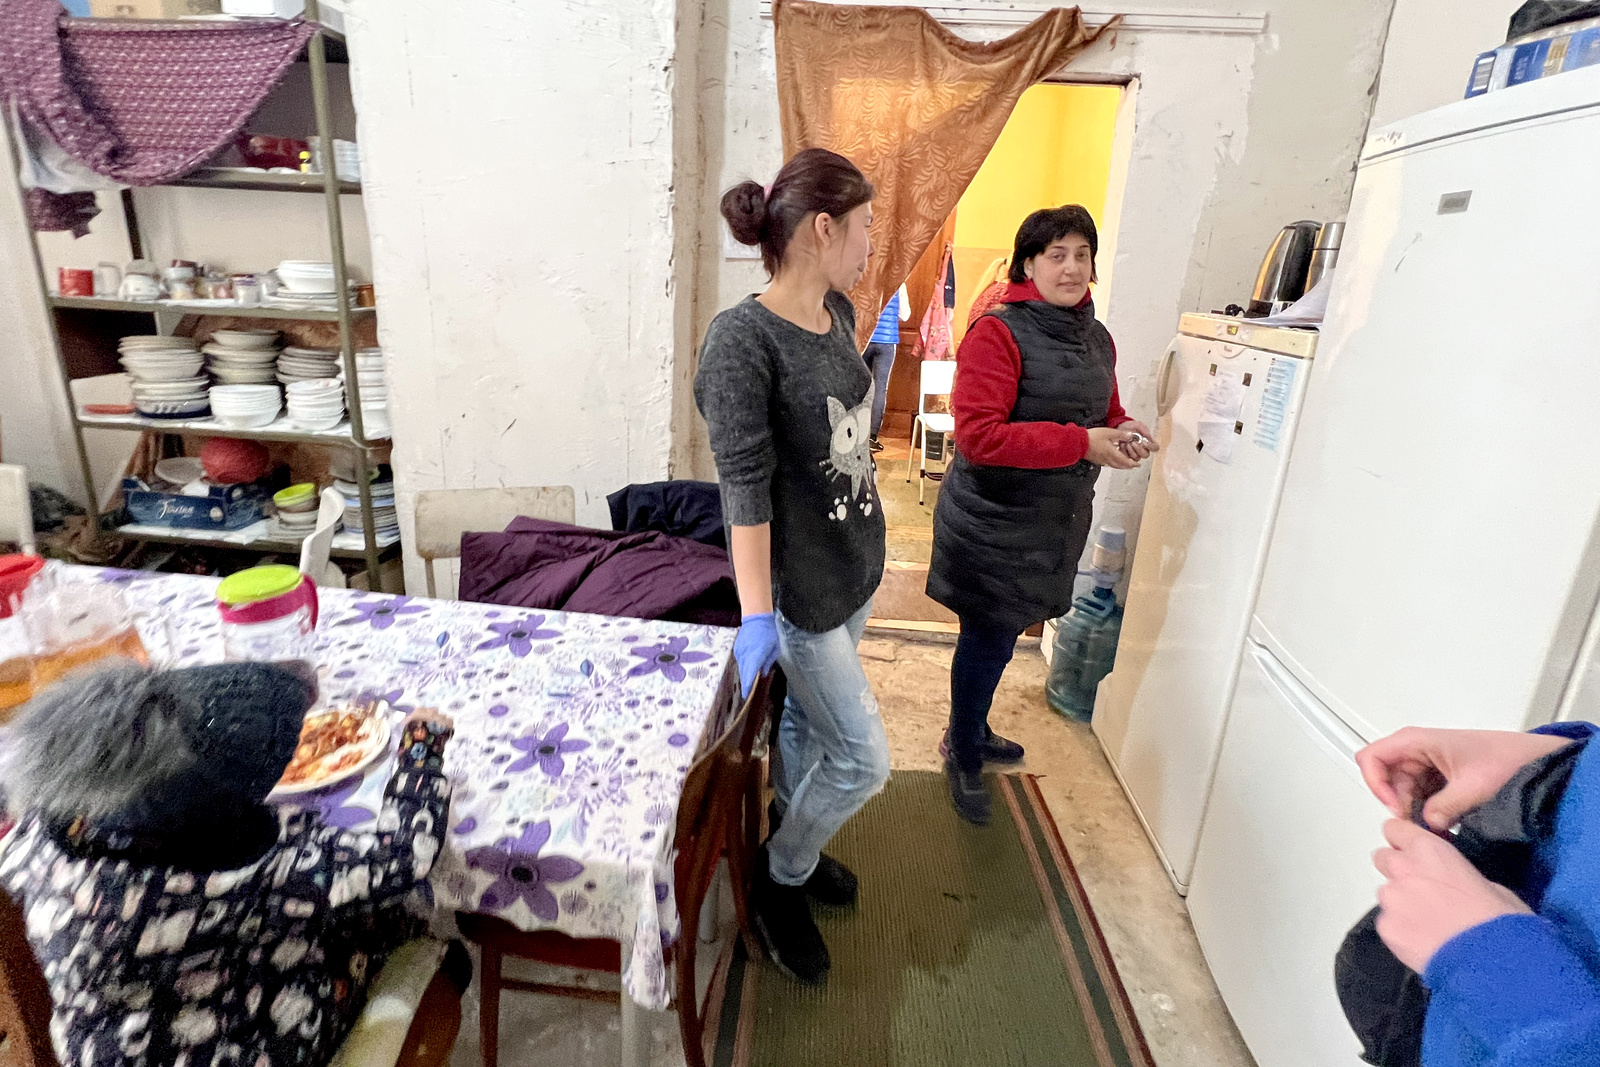 Ukraine. Couple opens hostel near Slovak border for people displaced by fighting